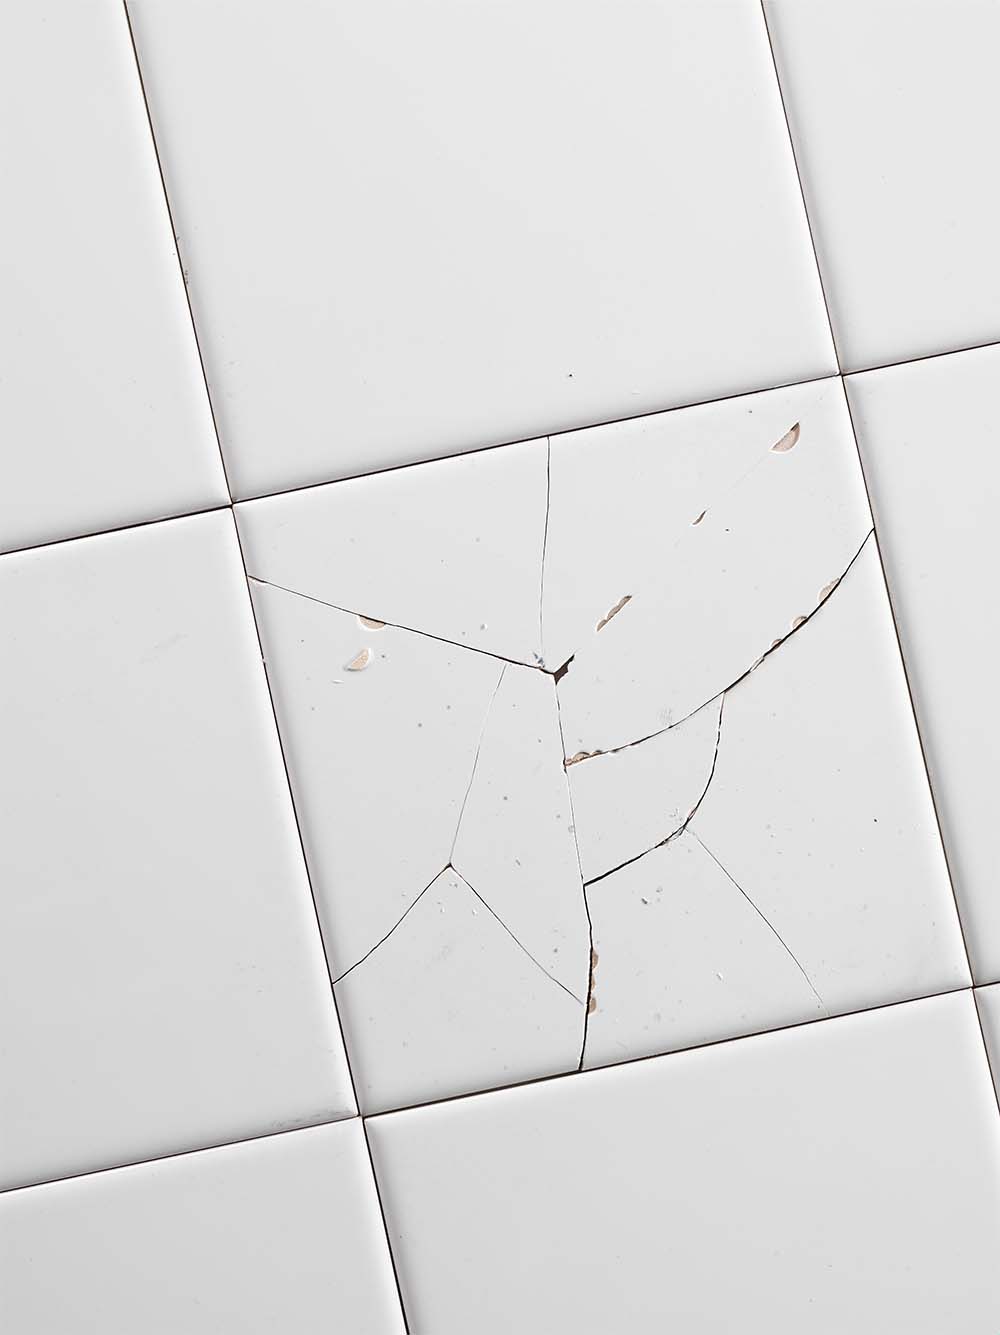 Cracked Tile Repair Services By All Sorts Of Jobs